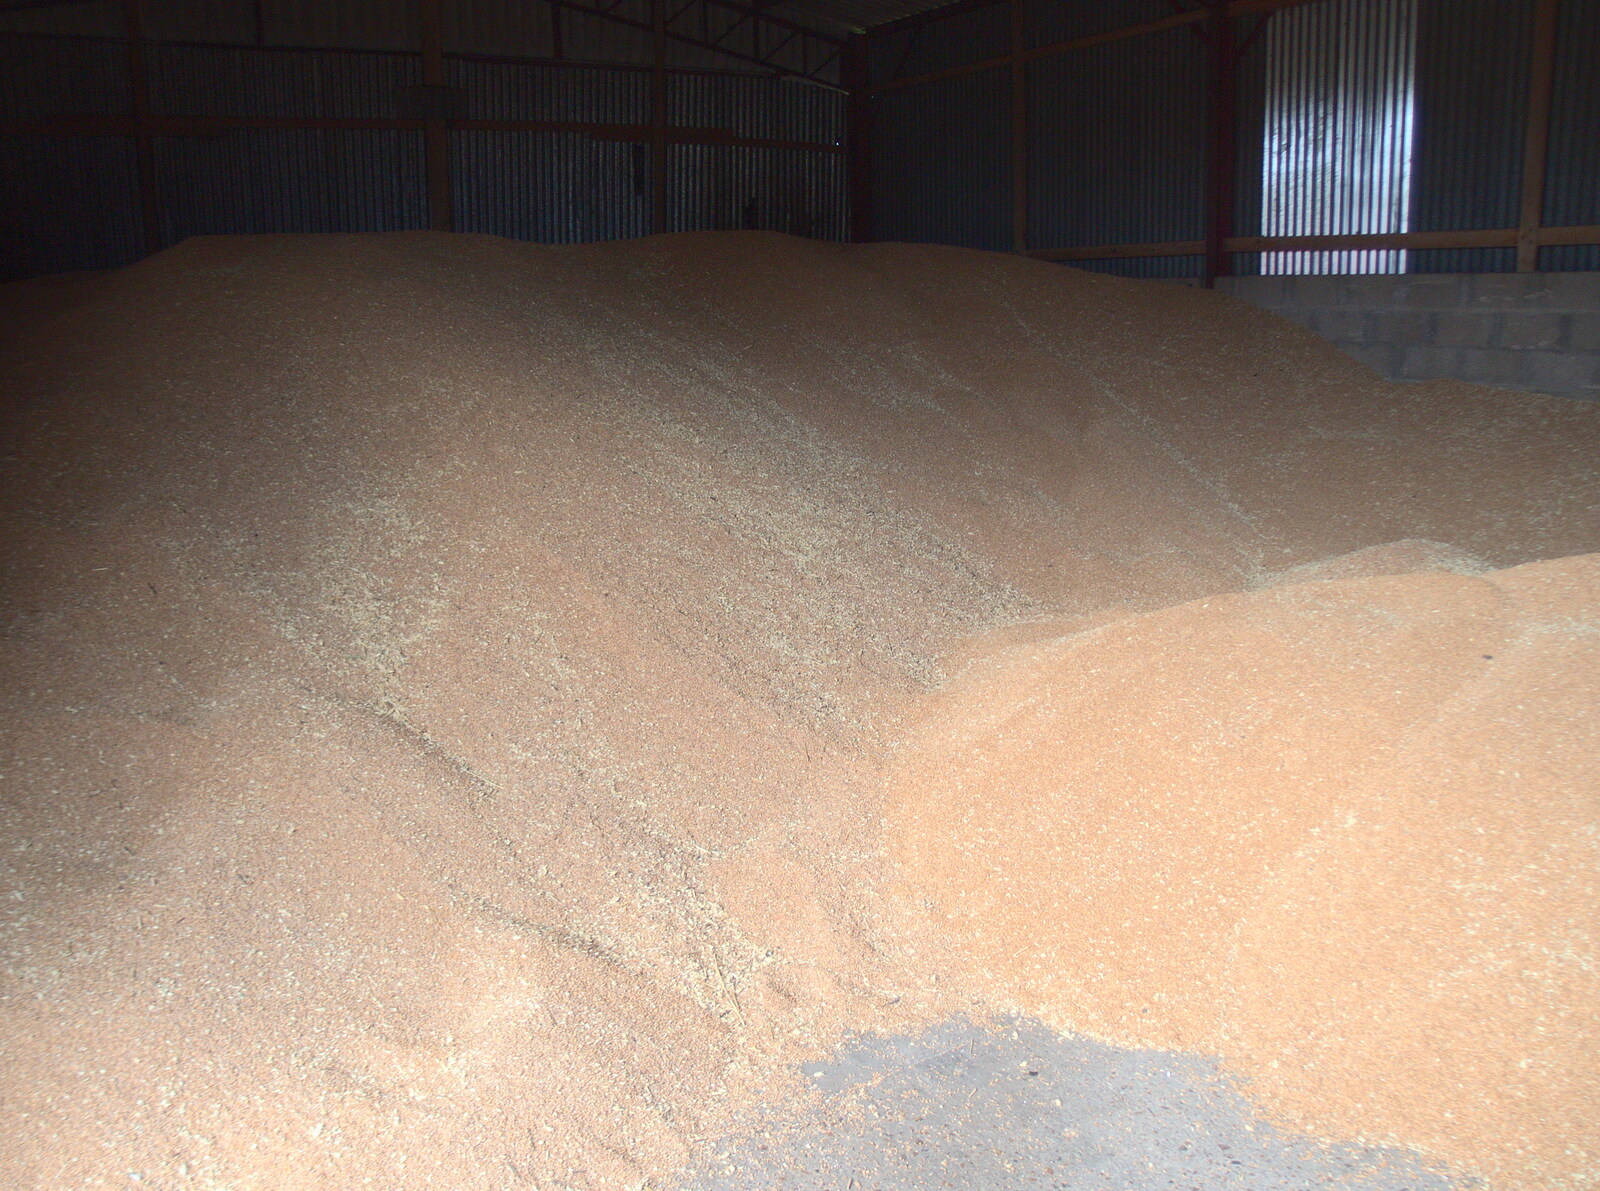 Valley Farm's grain harvest  from The GSB at Wickham Skeith, Suffolk - 19th November 2022